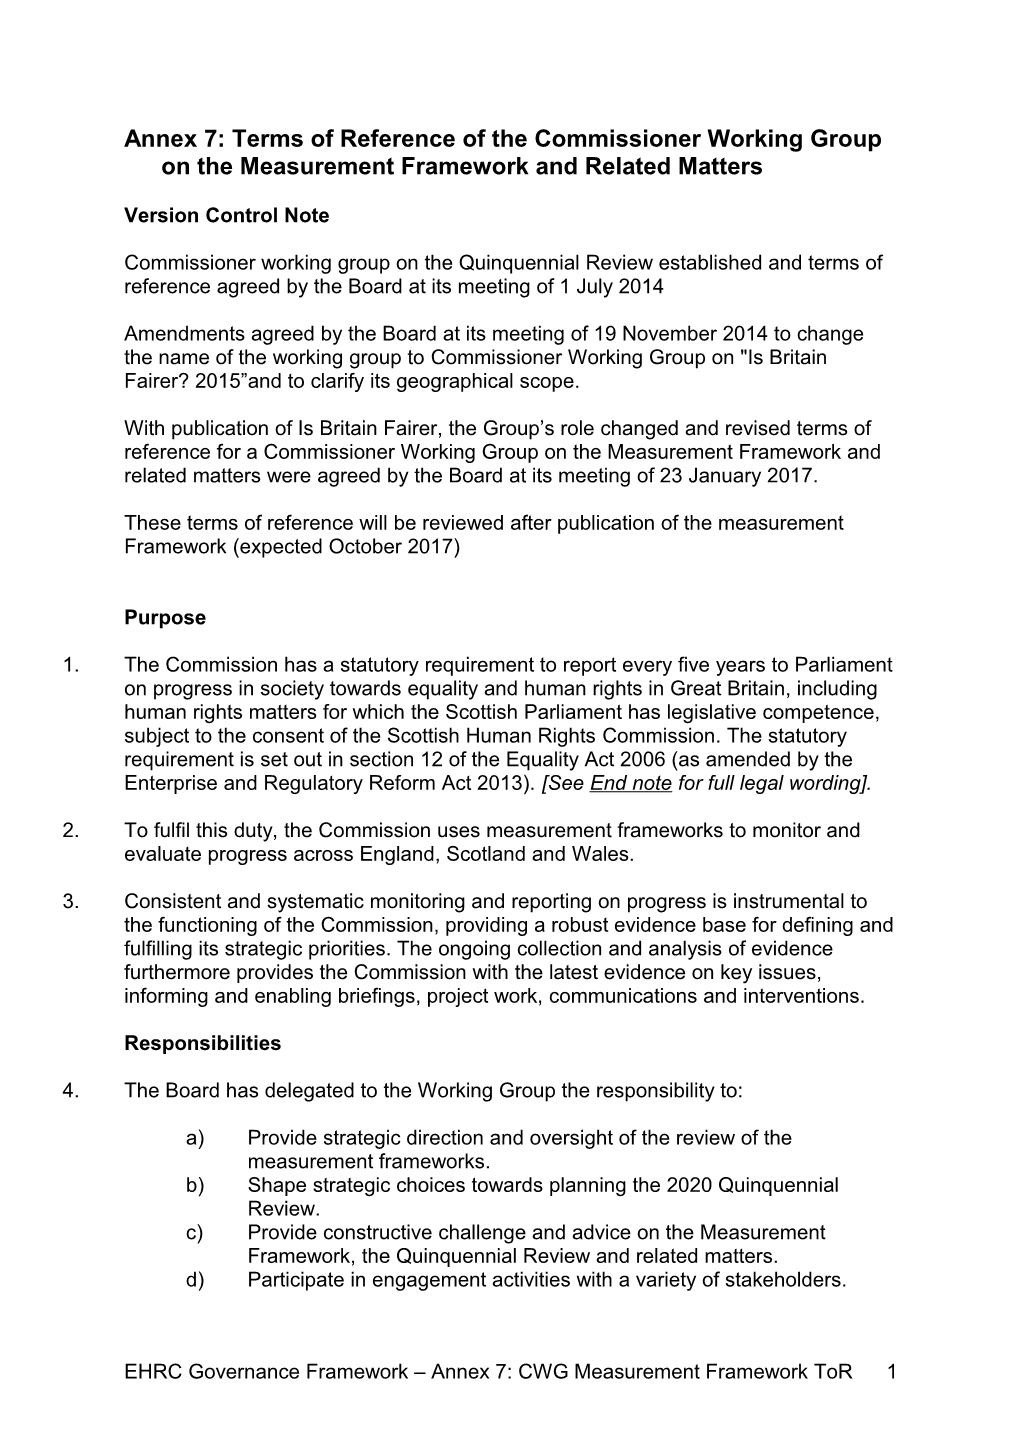 Annex 7: Terms of Reference of the Commissioner Working Group on the Measurement Framework